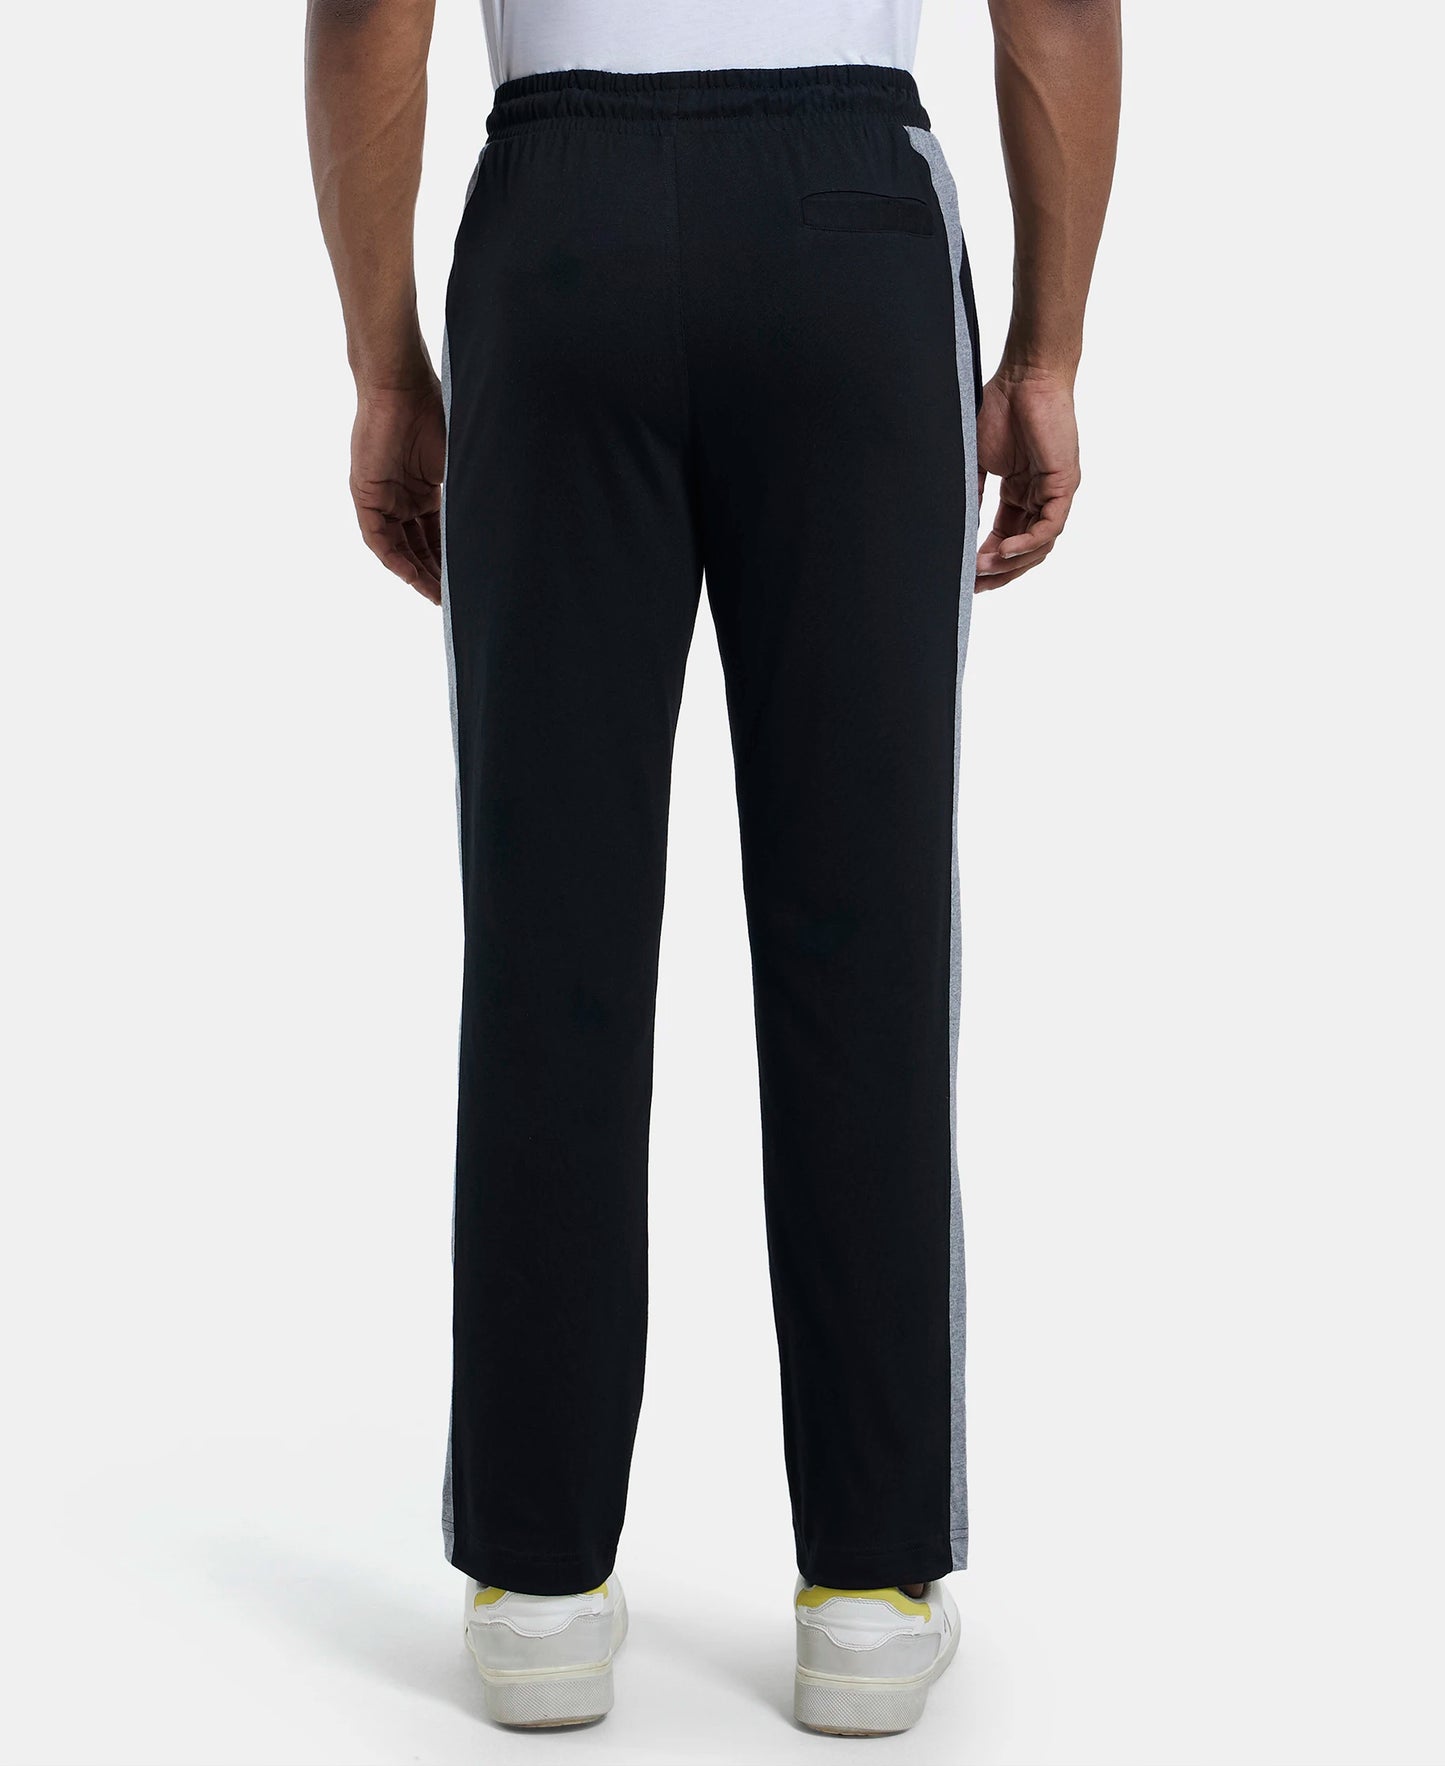 Super Combed Cotton Rich Straight Fit Trackpant with Side and Back Pockets - Black & Grey Melange-3